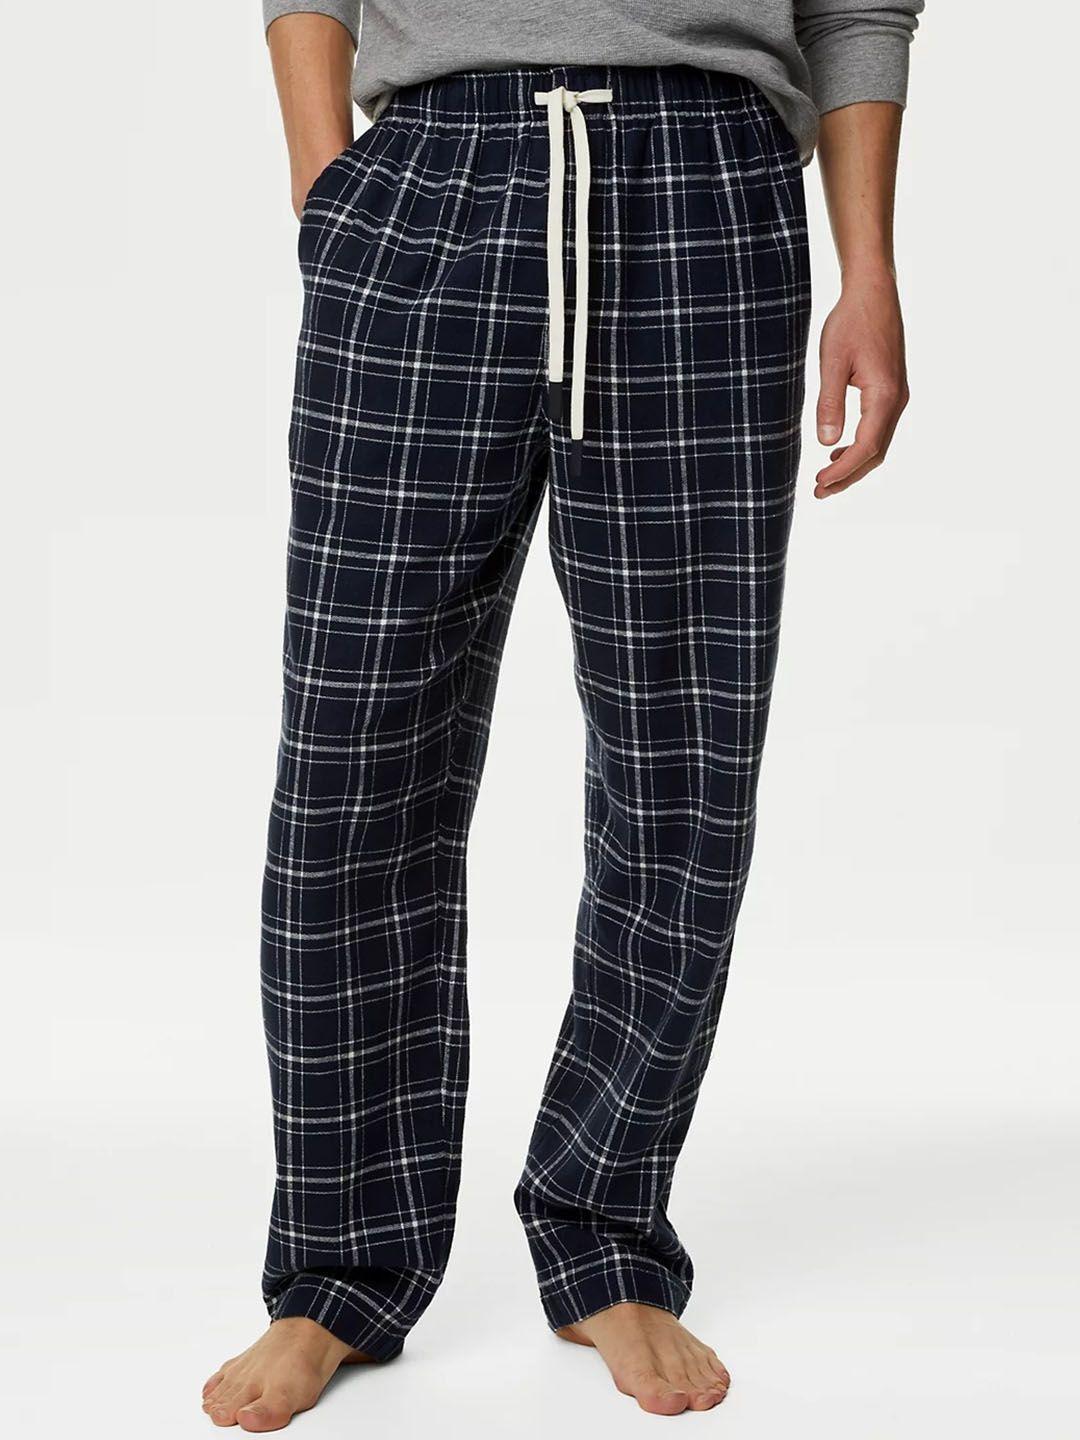 marks & spencer men navy blue & white checked cotton lounge pants